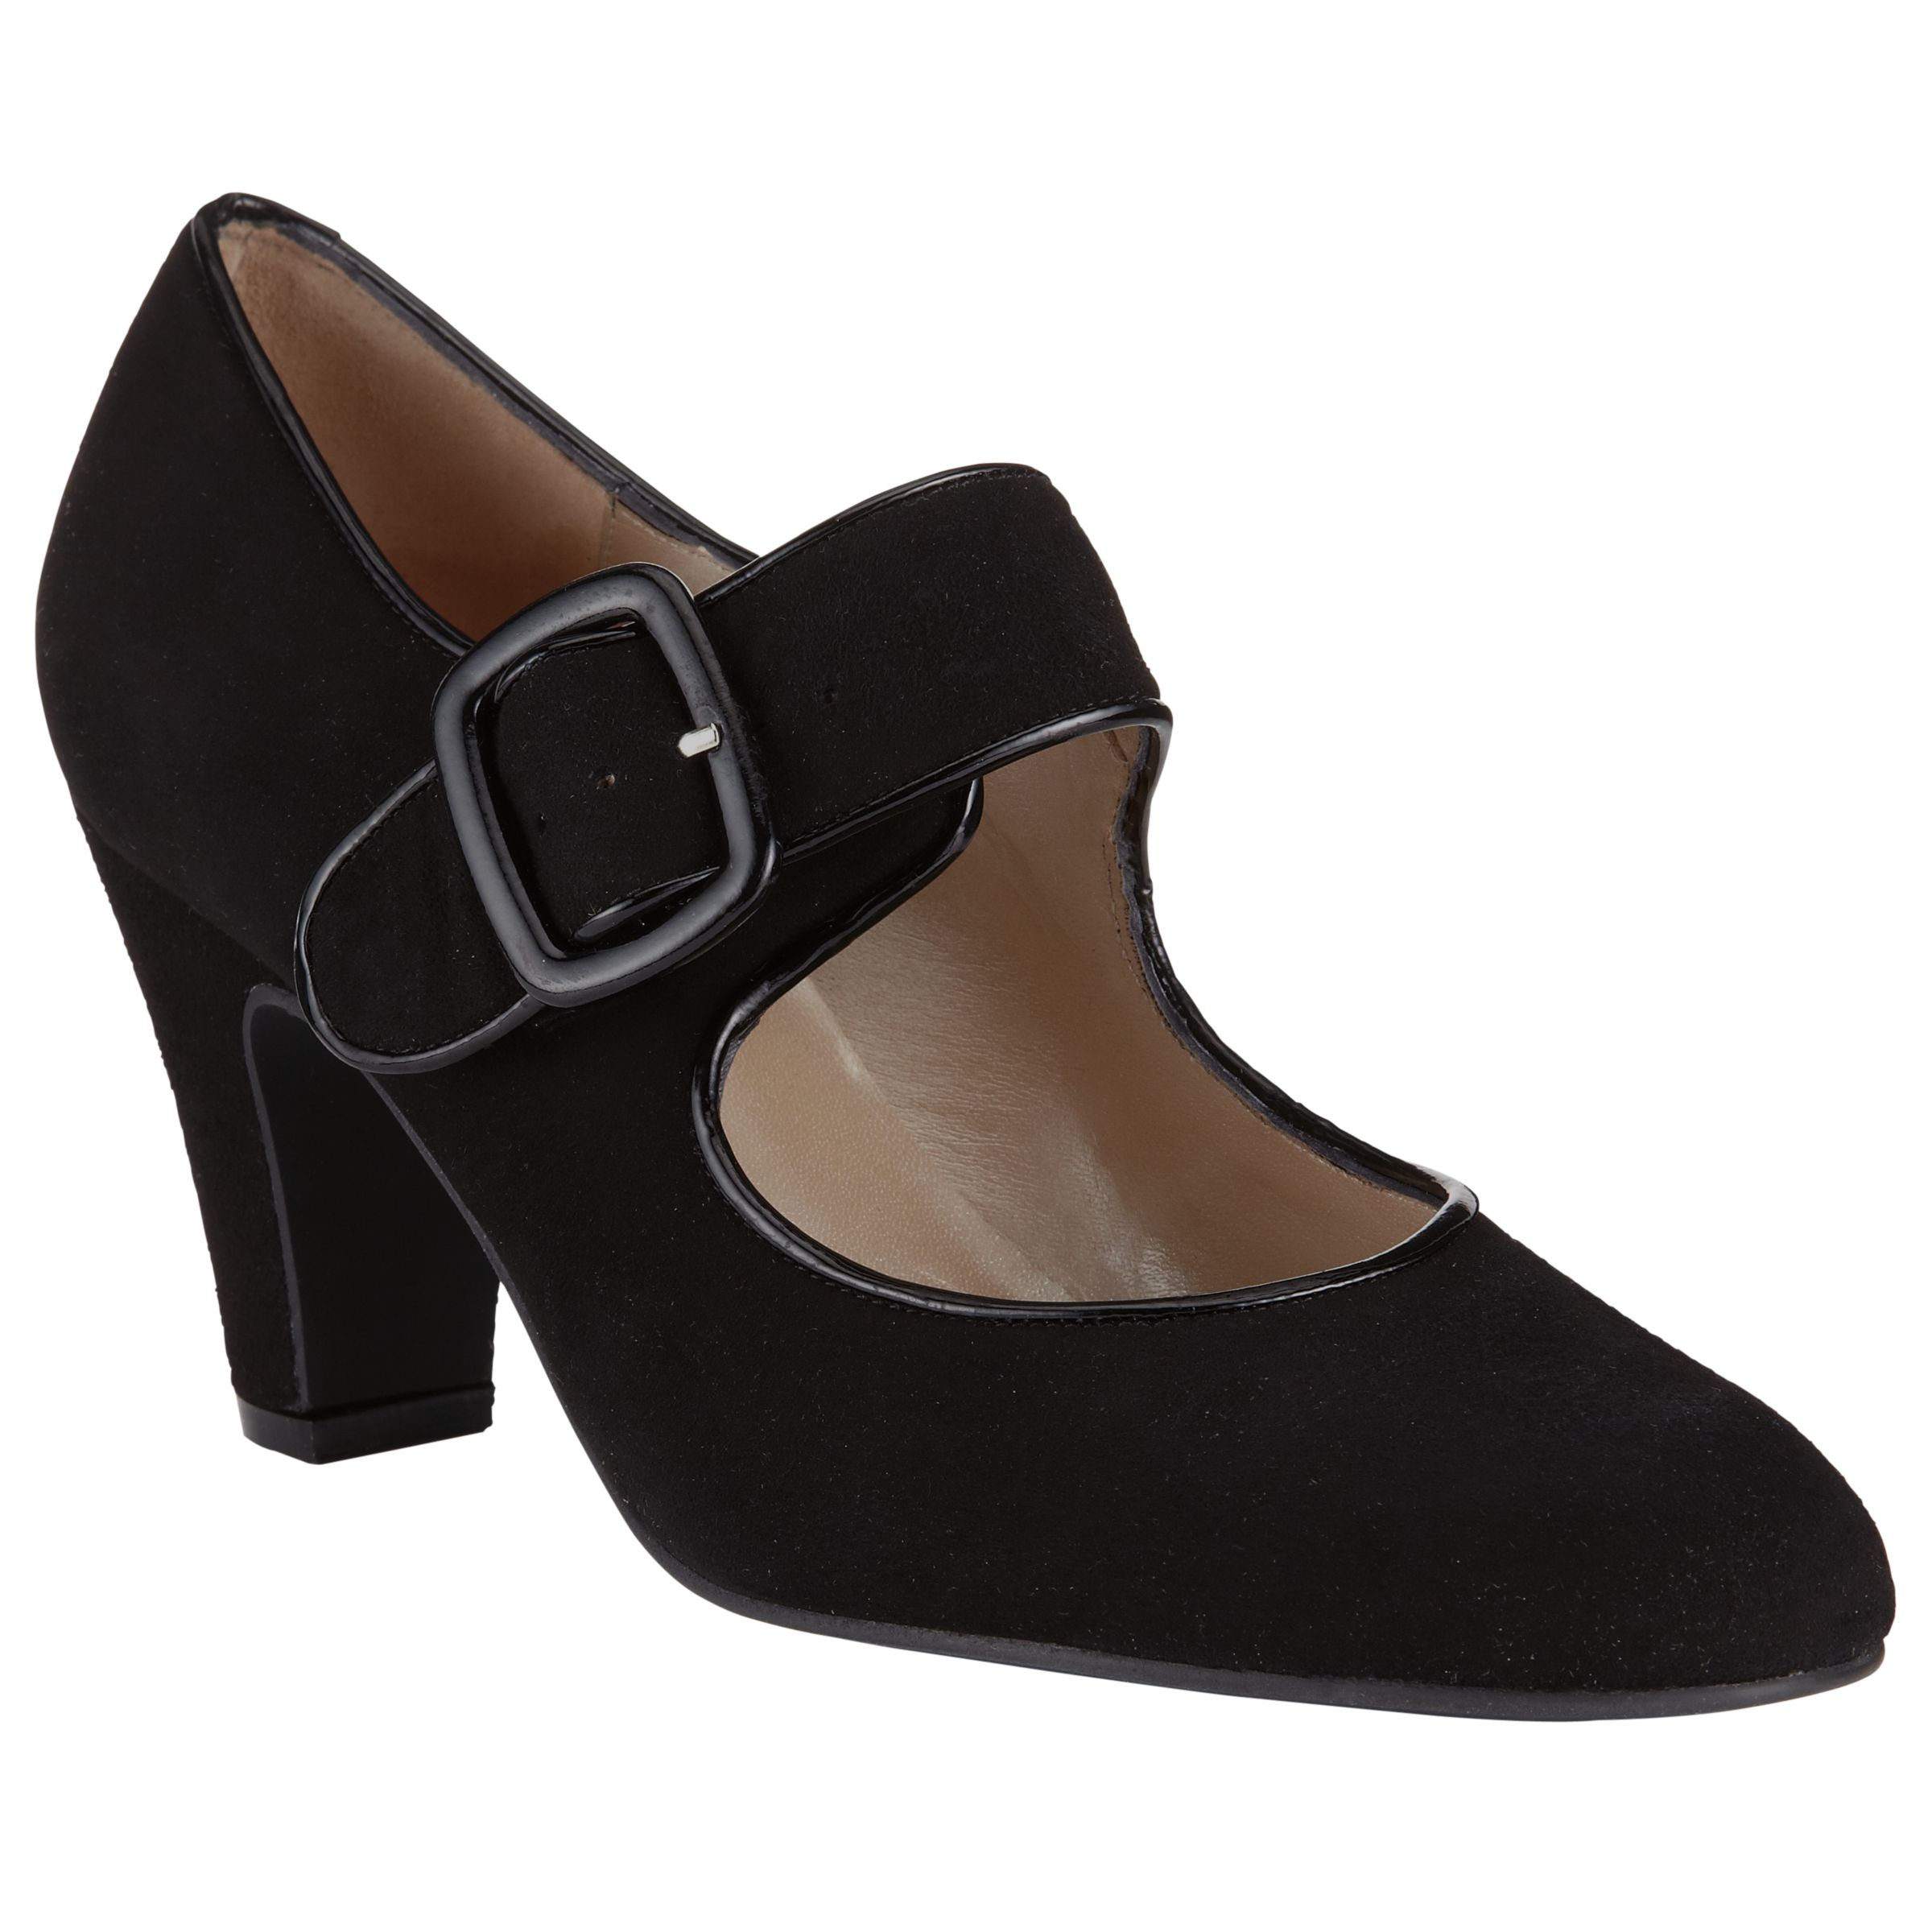 John Lewis & Partners Xercan Mary Jane Buckle Shoes, Black